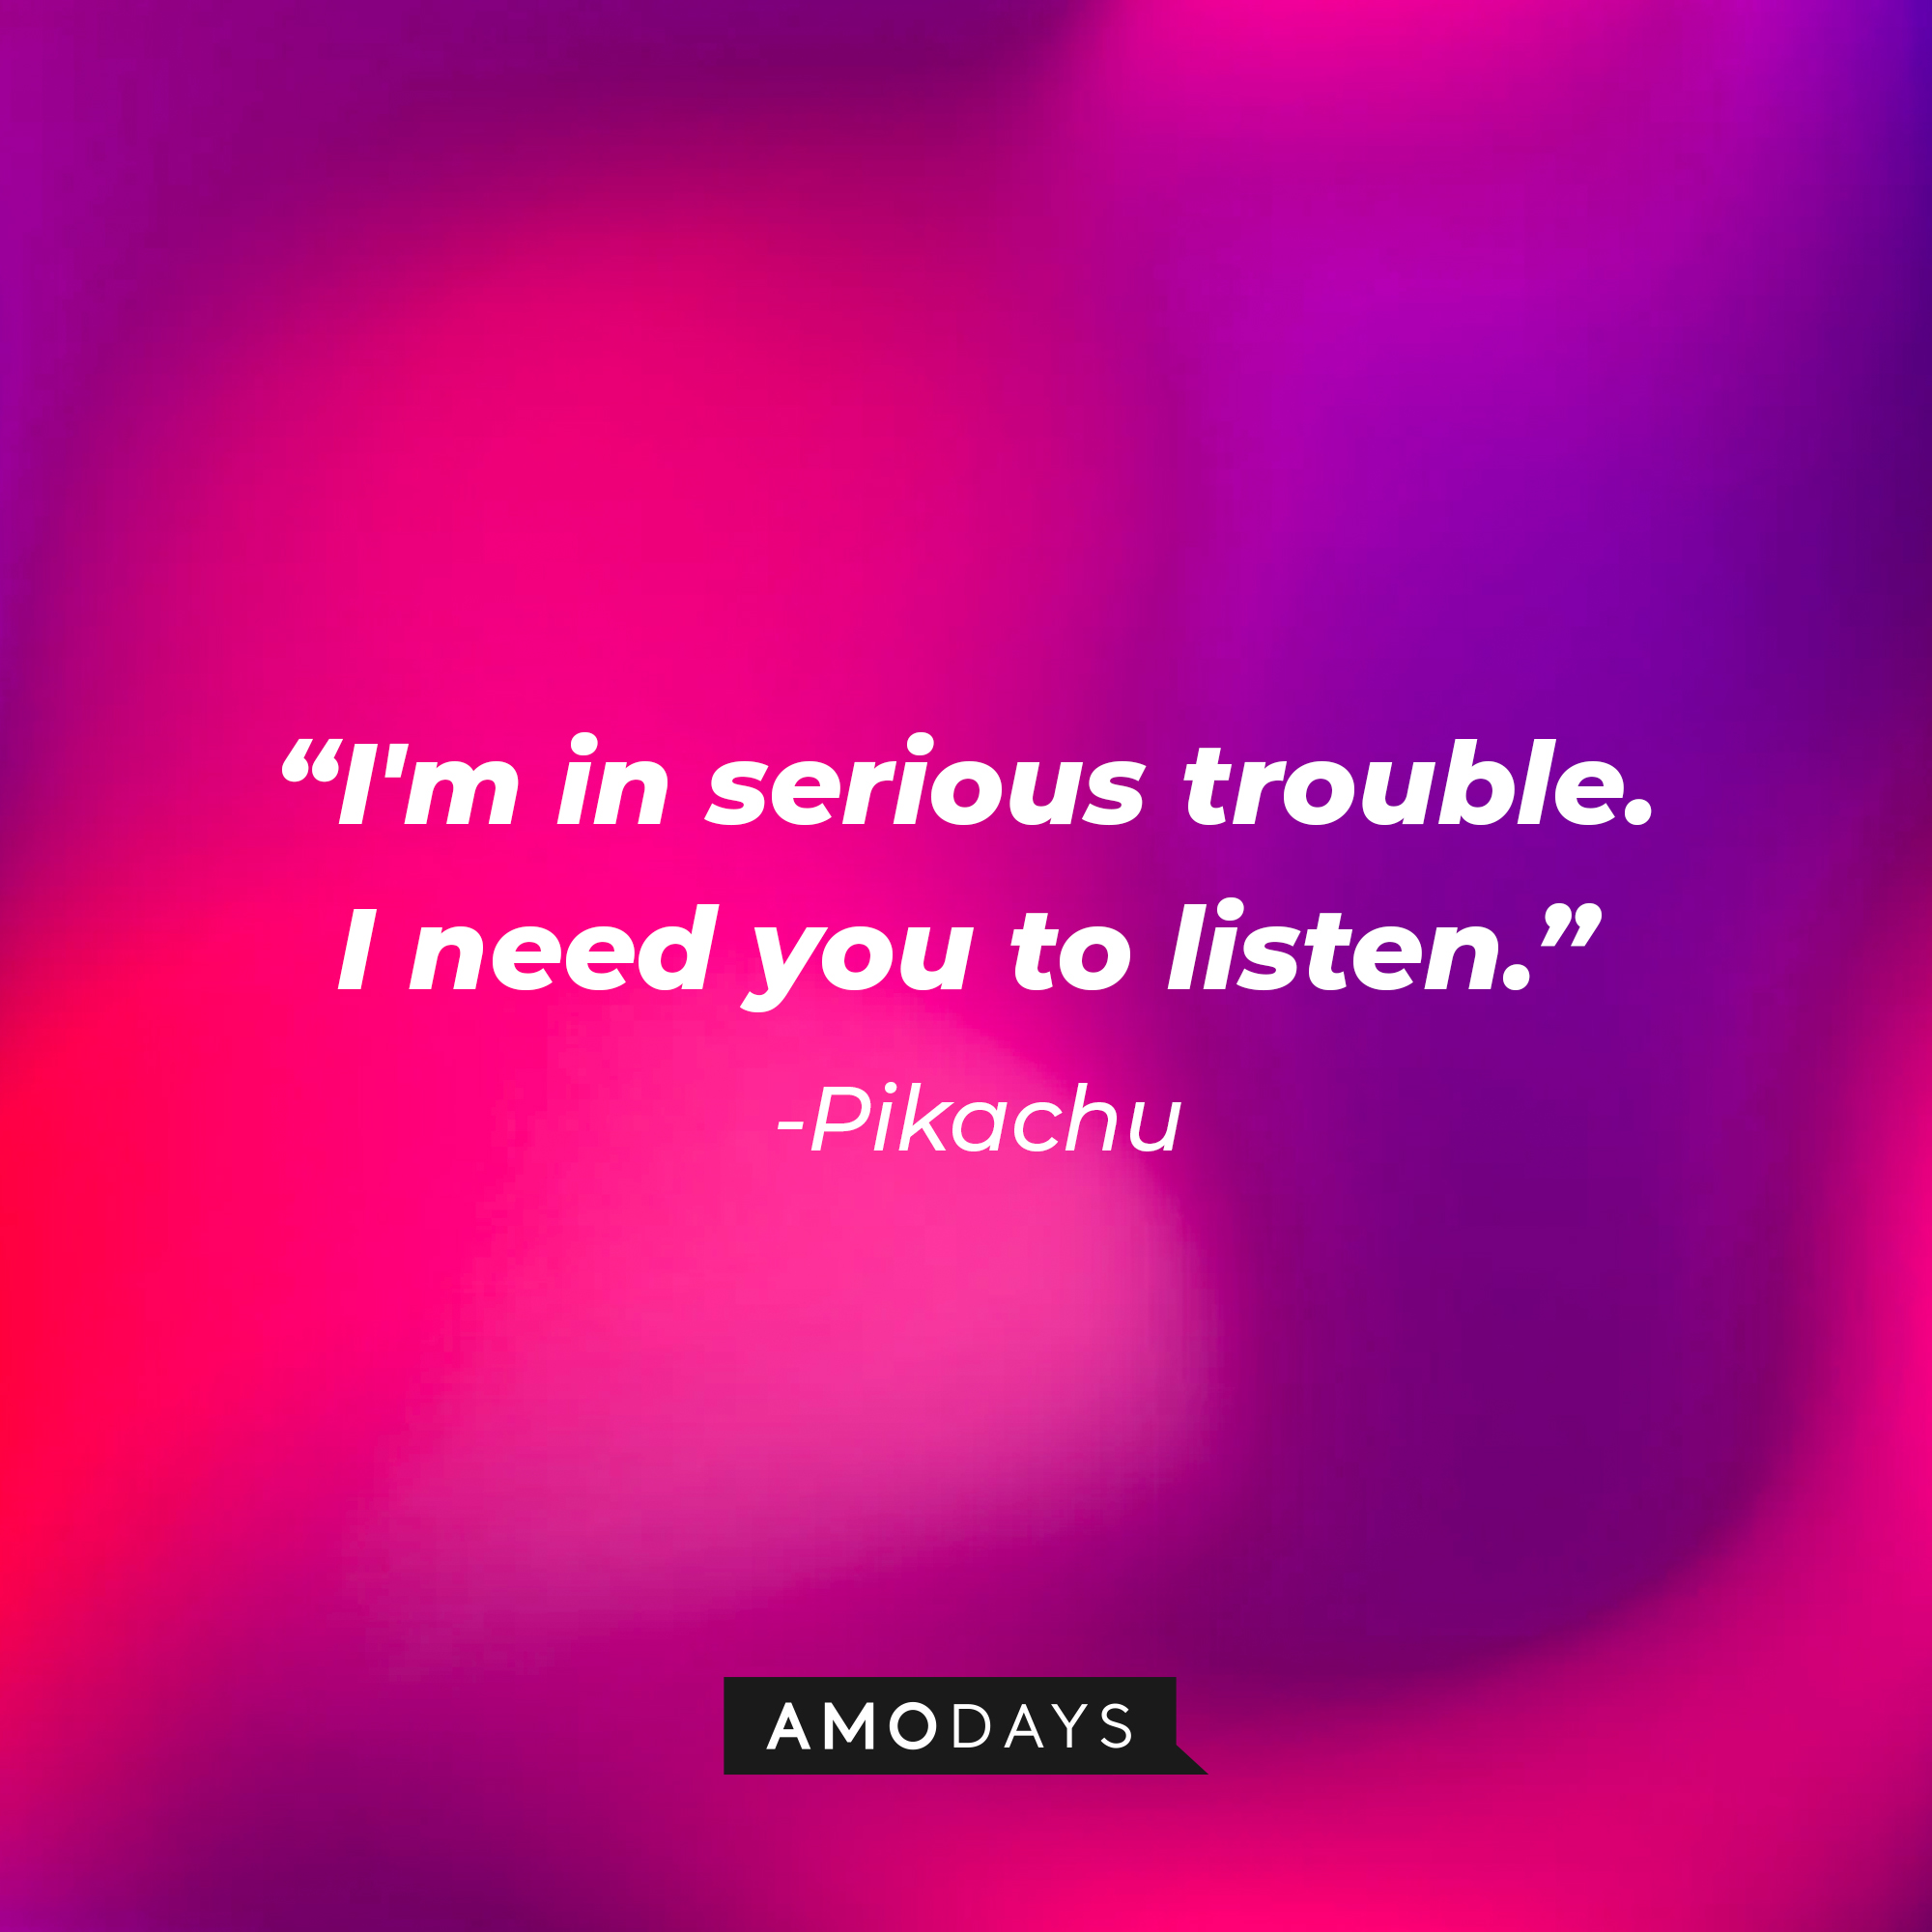 Pikachu's quote: "I'm in serious trouble. I need you to listen." | Source: AmoDays